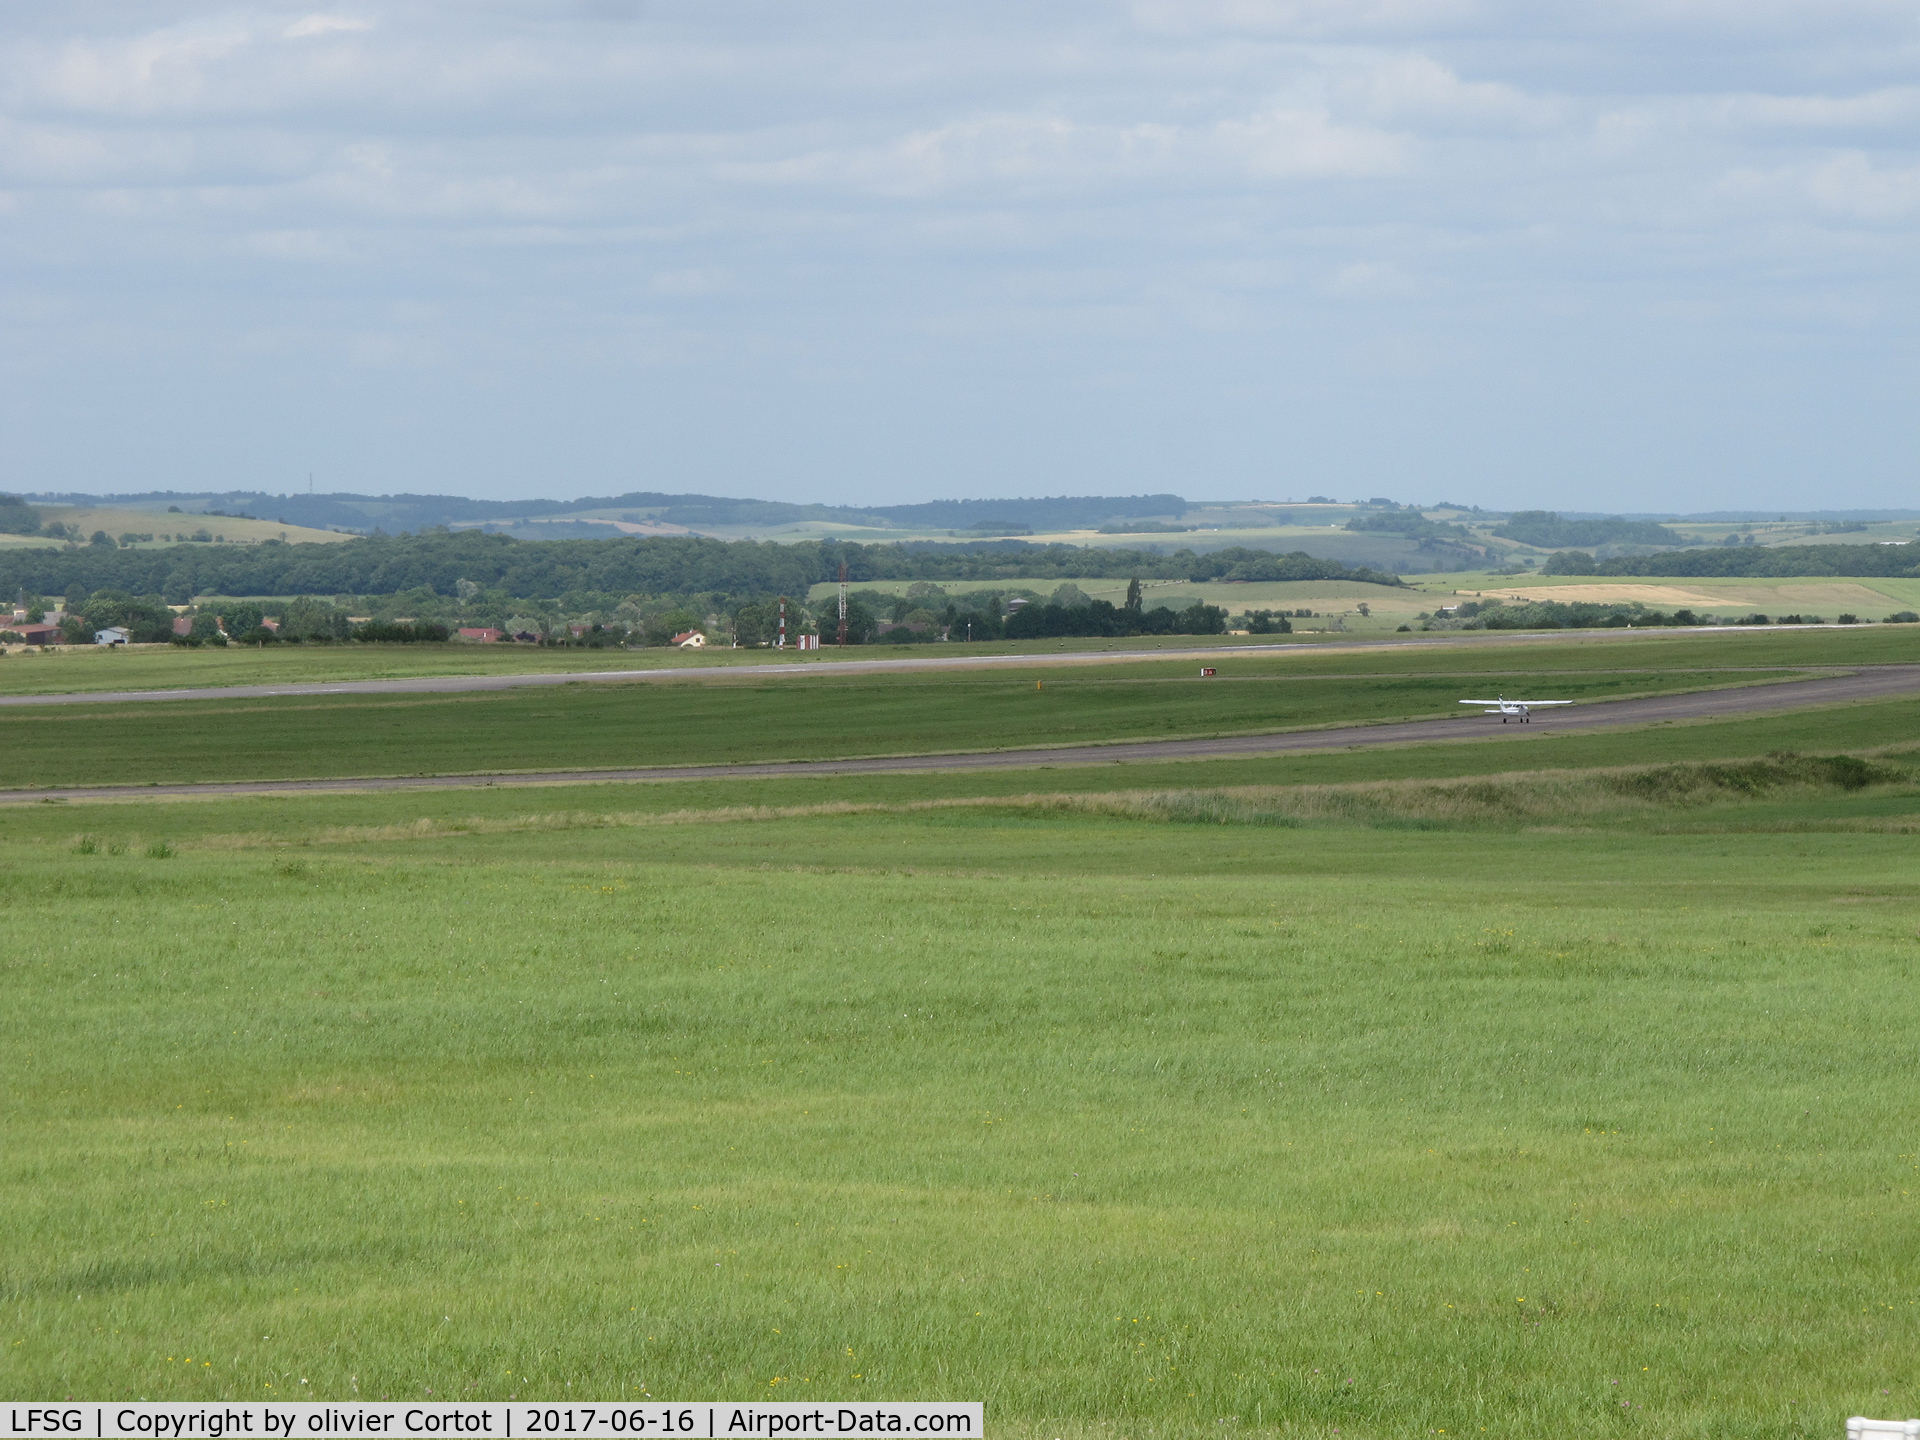 Épinal Mirecourt Airport, Épinal France (LFSG) - the taxiway and the runway on the left. Mirecourt is an ex NATO military airfield